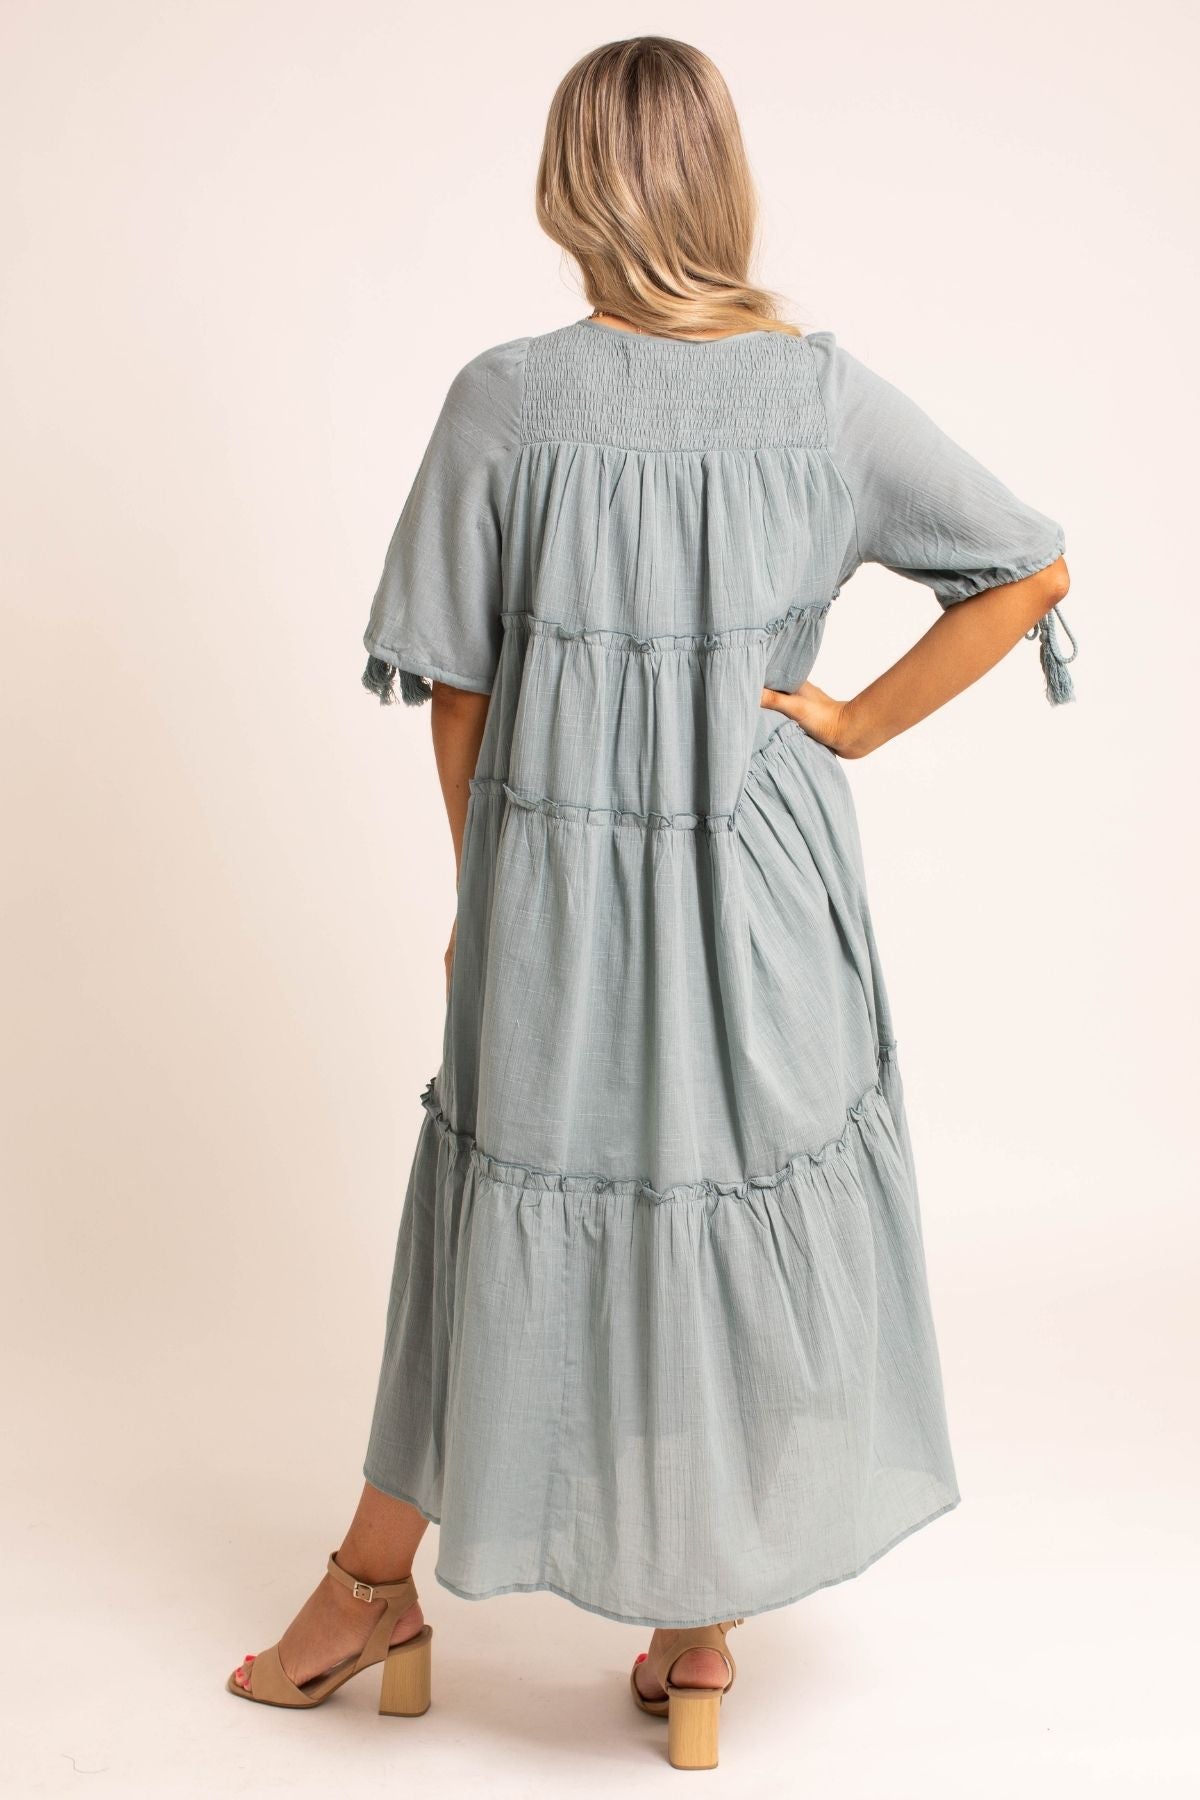 Maxi Dress with Smocked and Tiered Details.